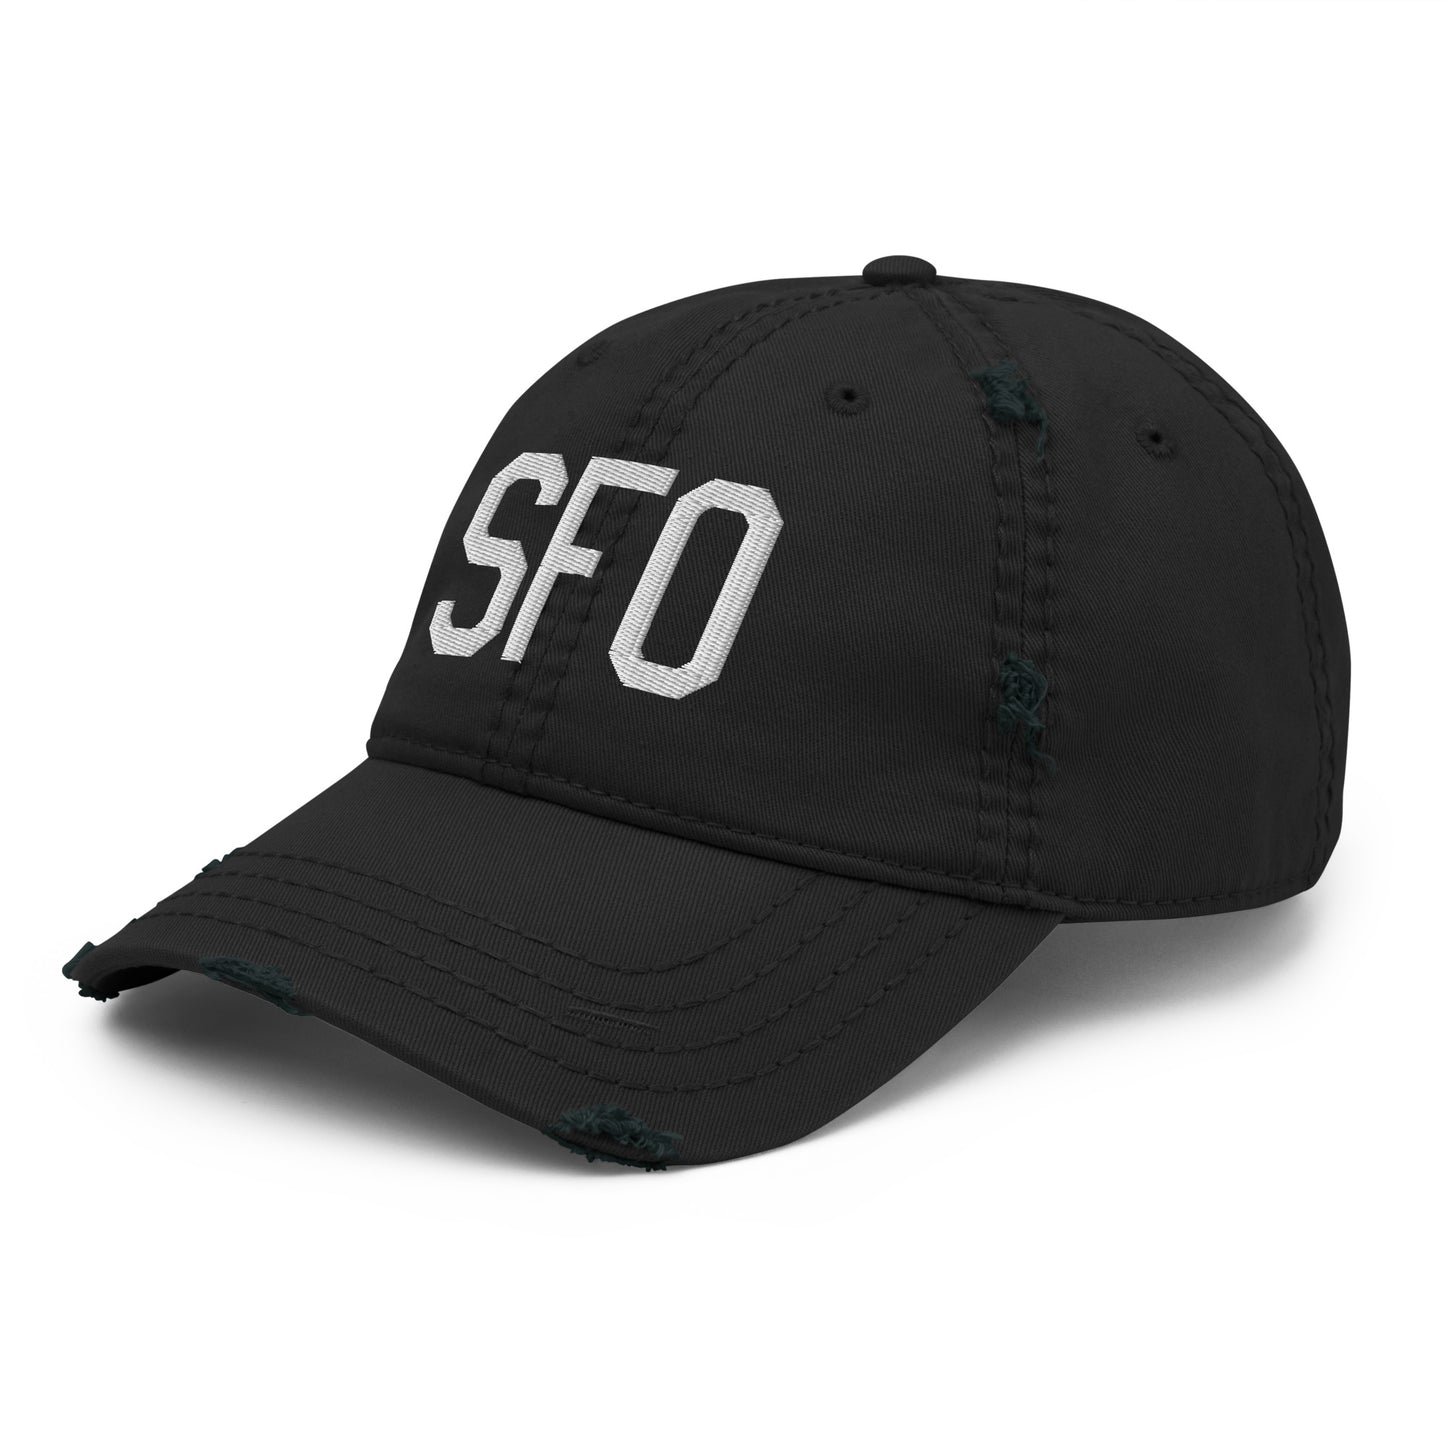 Airport Code Distressed Hat - White • SFO San Francisco • YHM Designs - Image 11